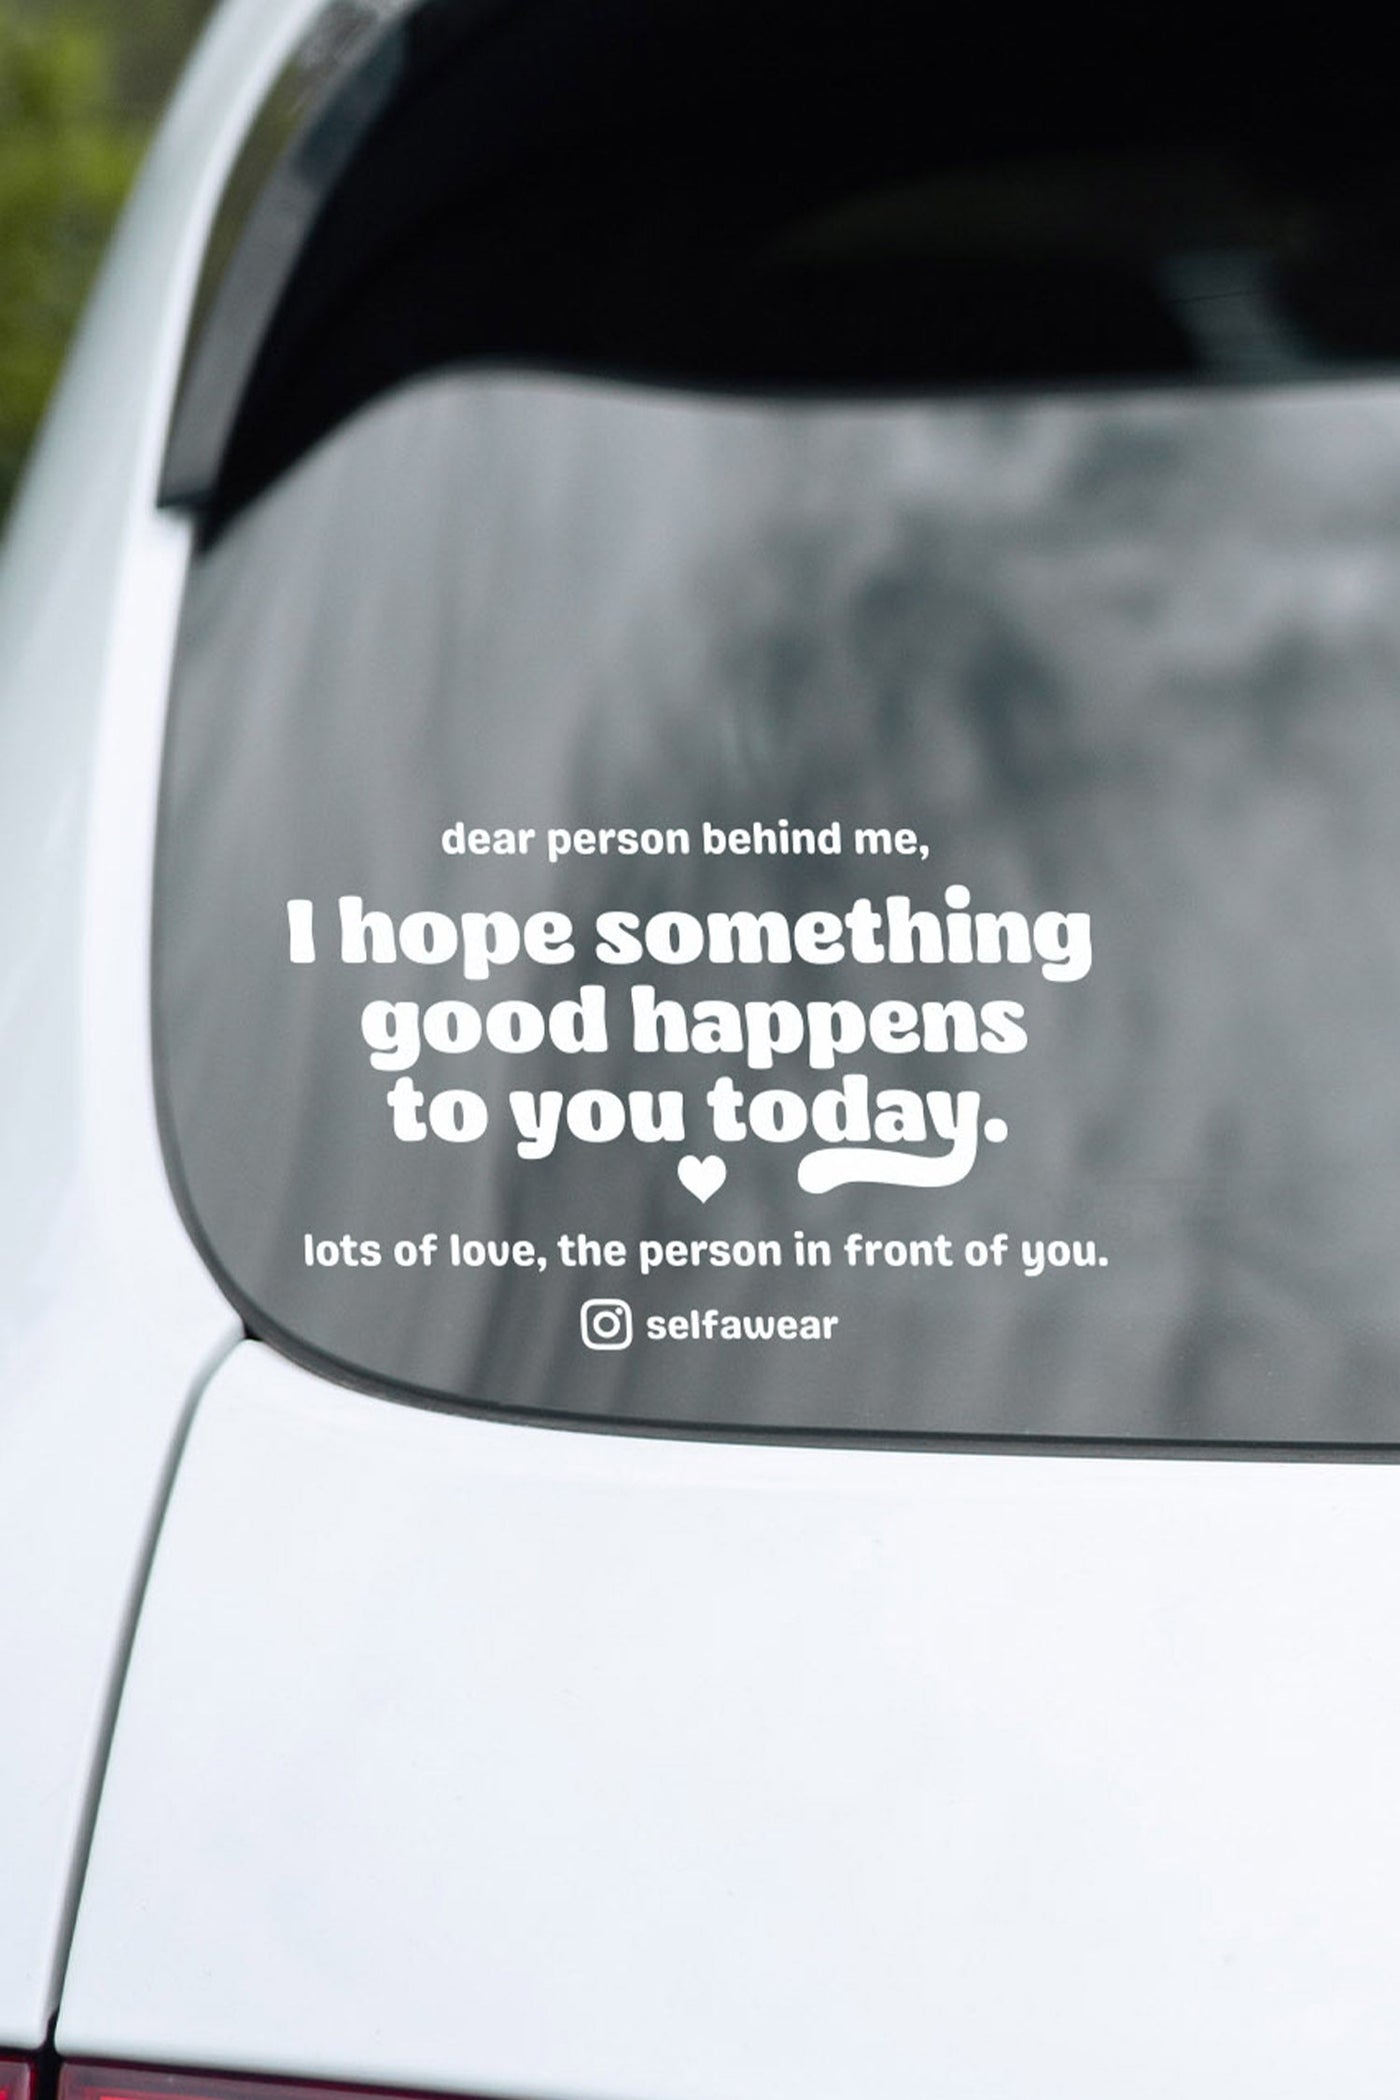 GOOD THINGS HAPPEN. - Positive Driving Car Sticker Affirmation Stickers Selfawear 